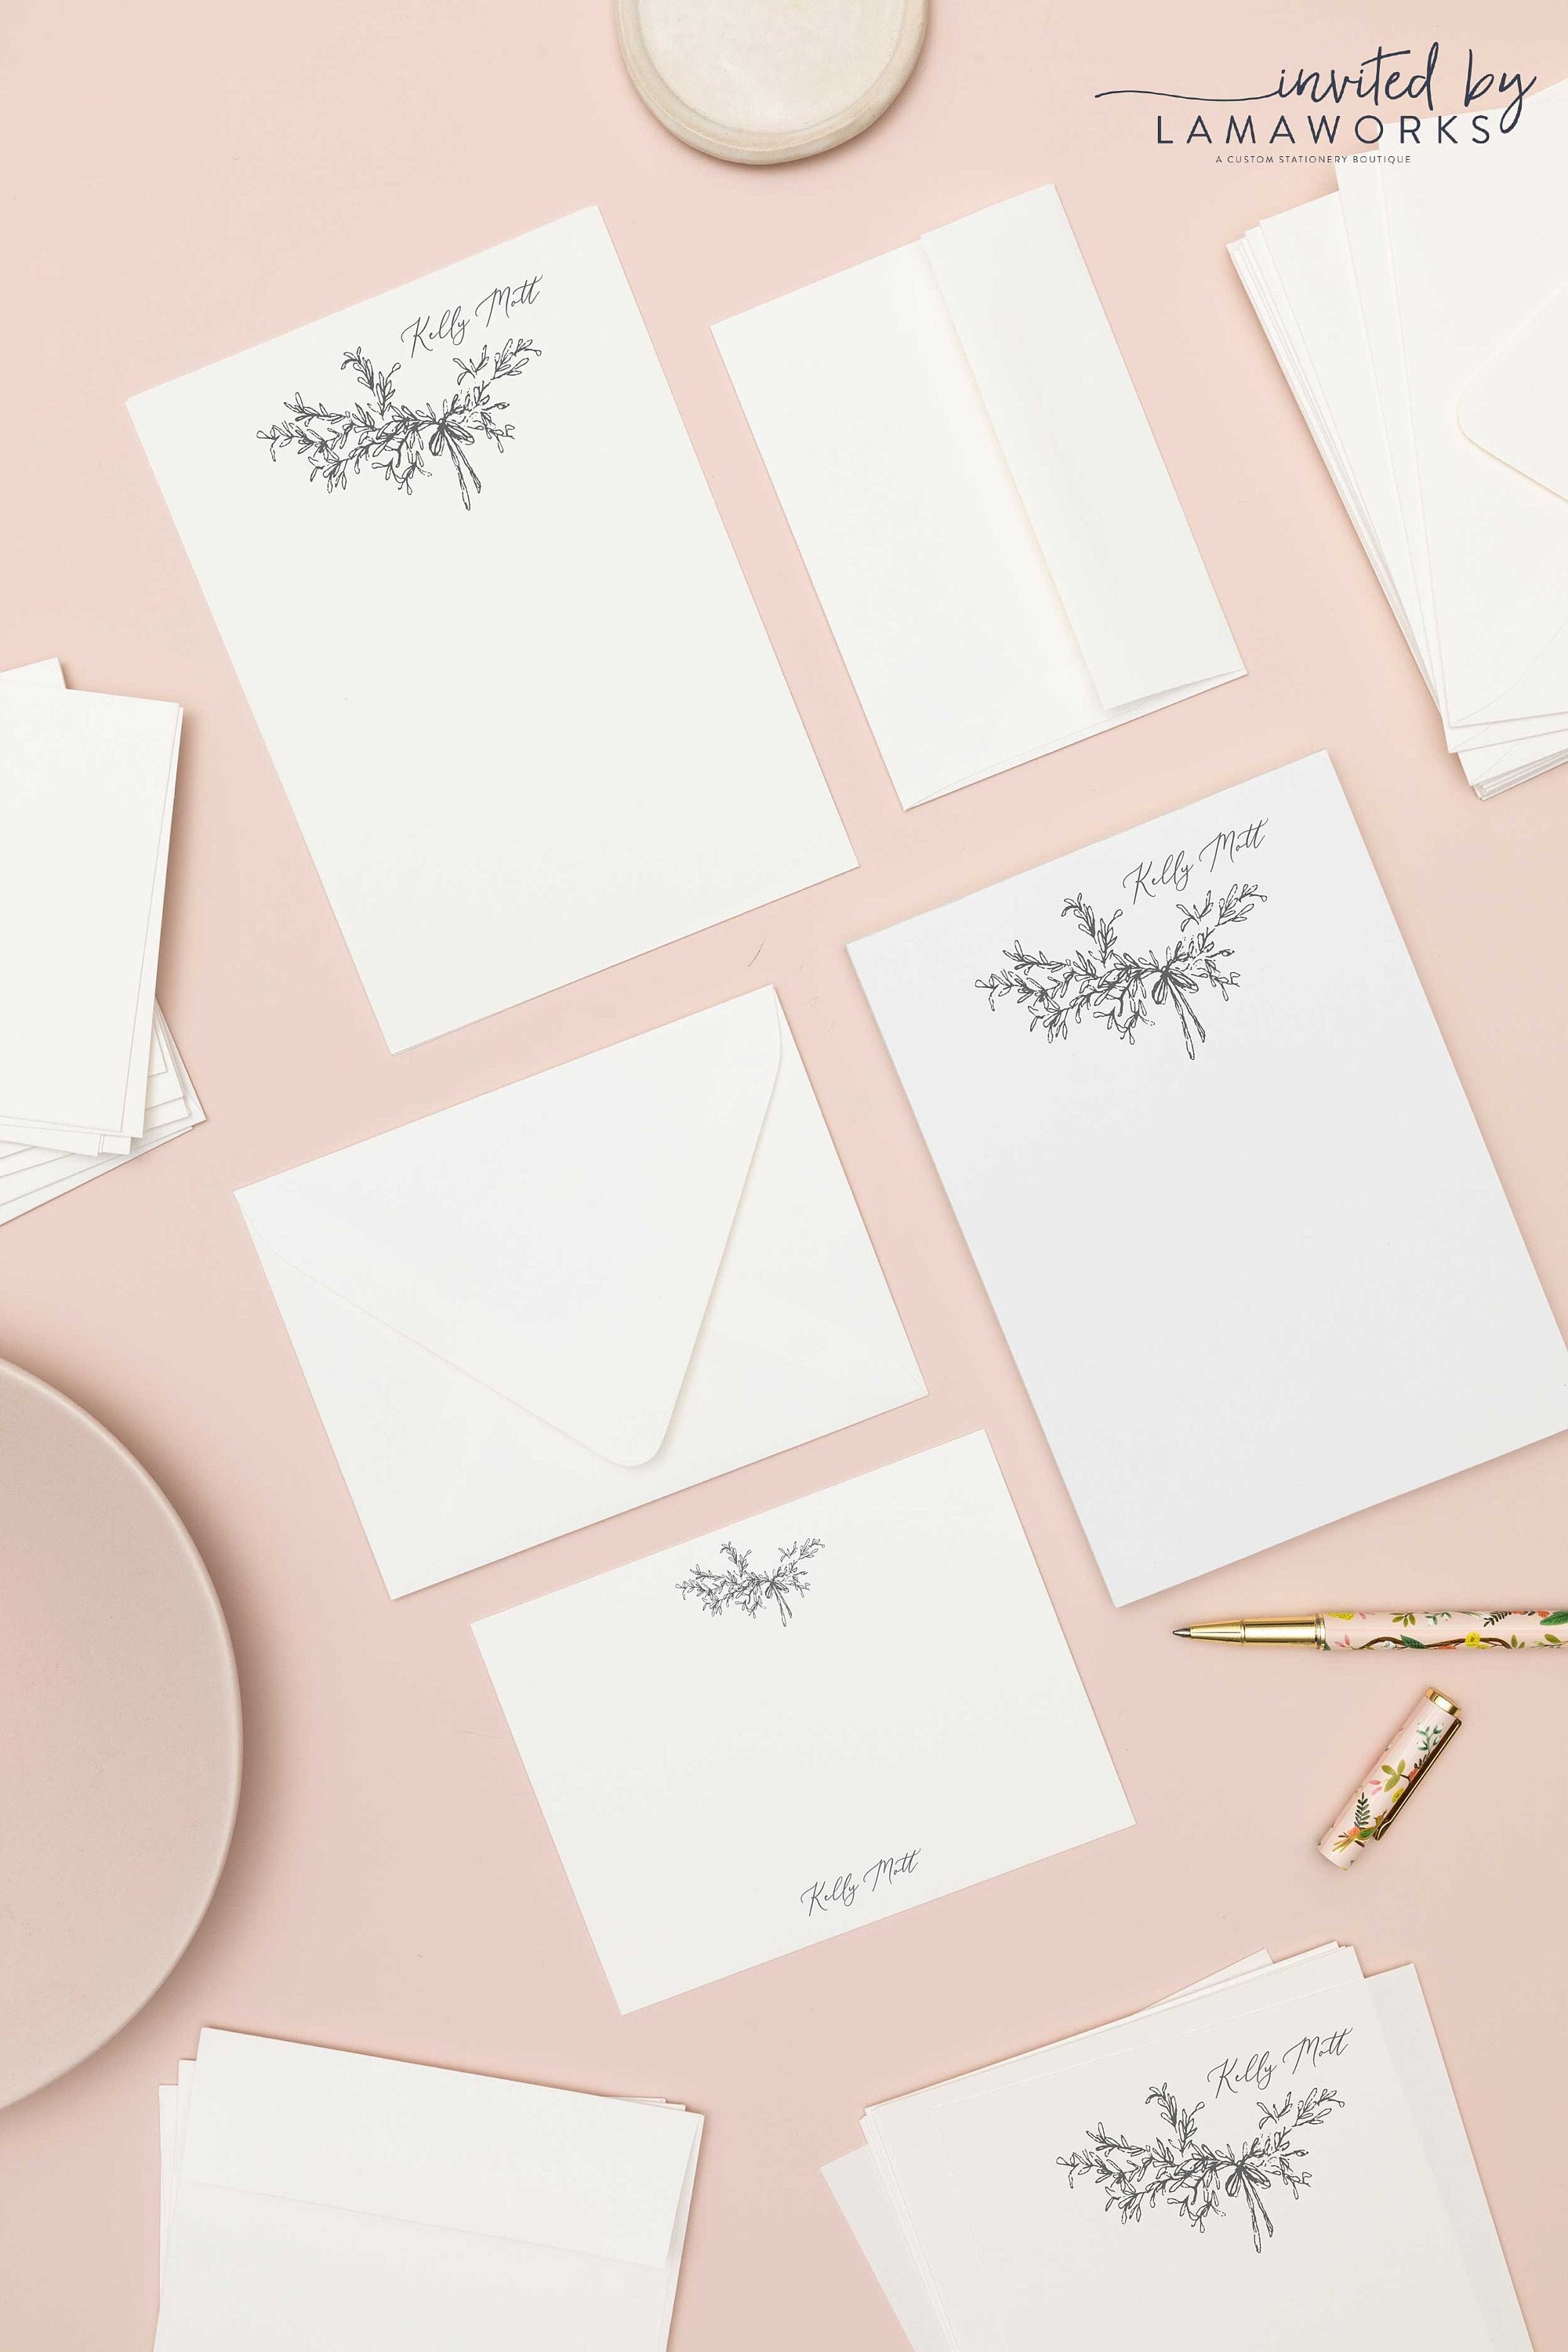 Personalized Stationery: Custom Printed